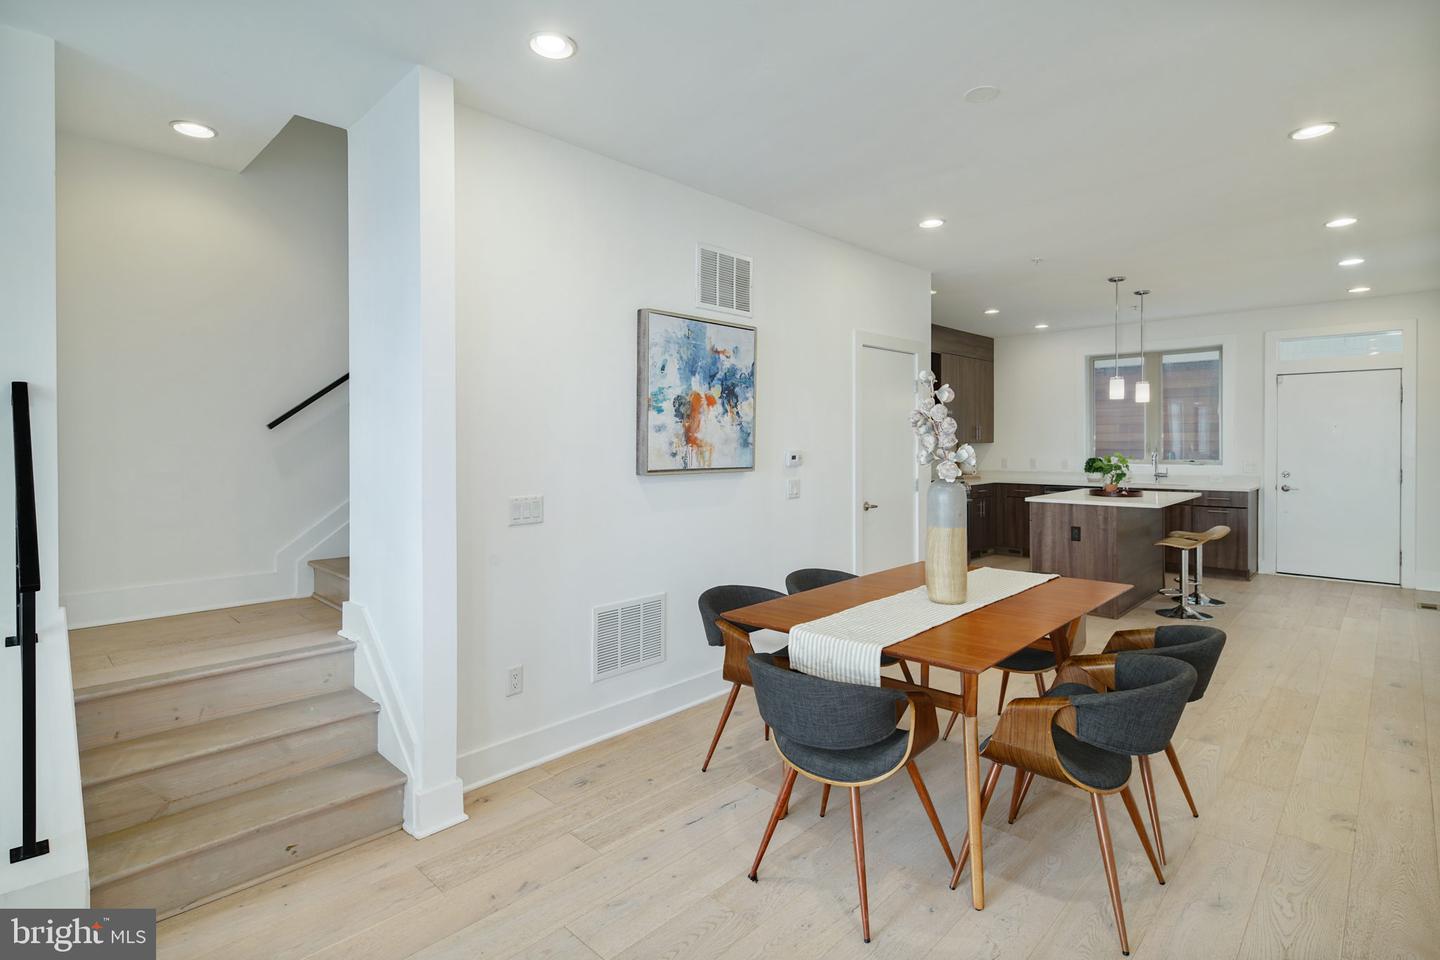 Photo 4 of 29 of 740 S Columbus Boulevard #54 townhome